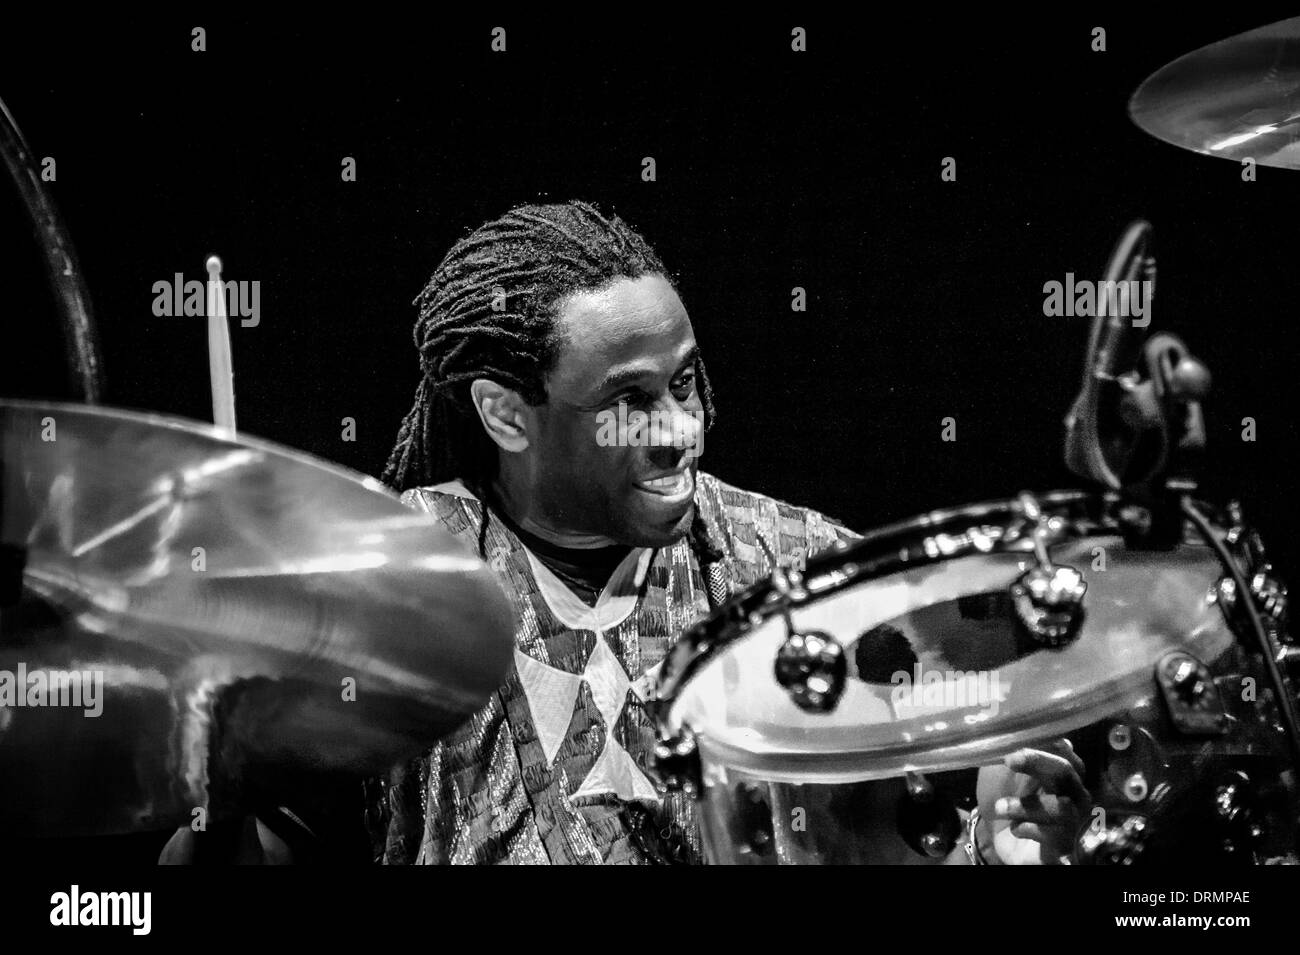 Toronto, Ontario, Canada. 24th Jan, 2014. WILL CALHOUN (Living Color) The Bonzo Bash, it is the ultimate celebration for the ultimate drummer, John Henry Bonham of Led Zeppelin. It is presented by Natal and Marshall and is a night filled with amazing drummers playing their favorite Led Zeppelin song. It is a complete evening of Led Zeppelin jams and this year was a crazy one! It was be hosted by Mike Portnoy, Carmine Appice and the show creator, Brian Tichy at The Observatory club in Santa Ana, CA. © Igor Vidyashev/ZUMAPRESS.com/Alamy Live News Stock Photo